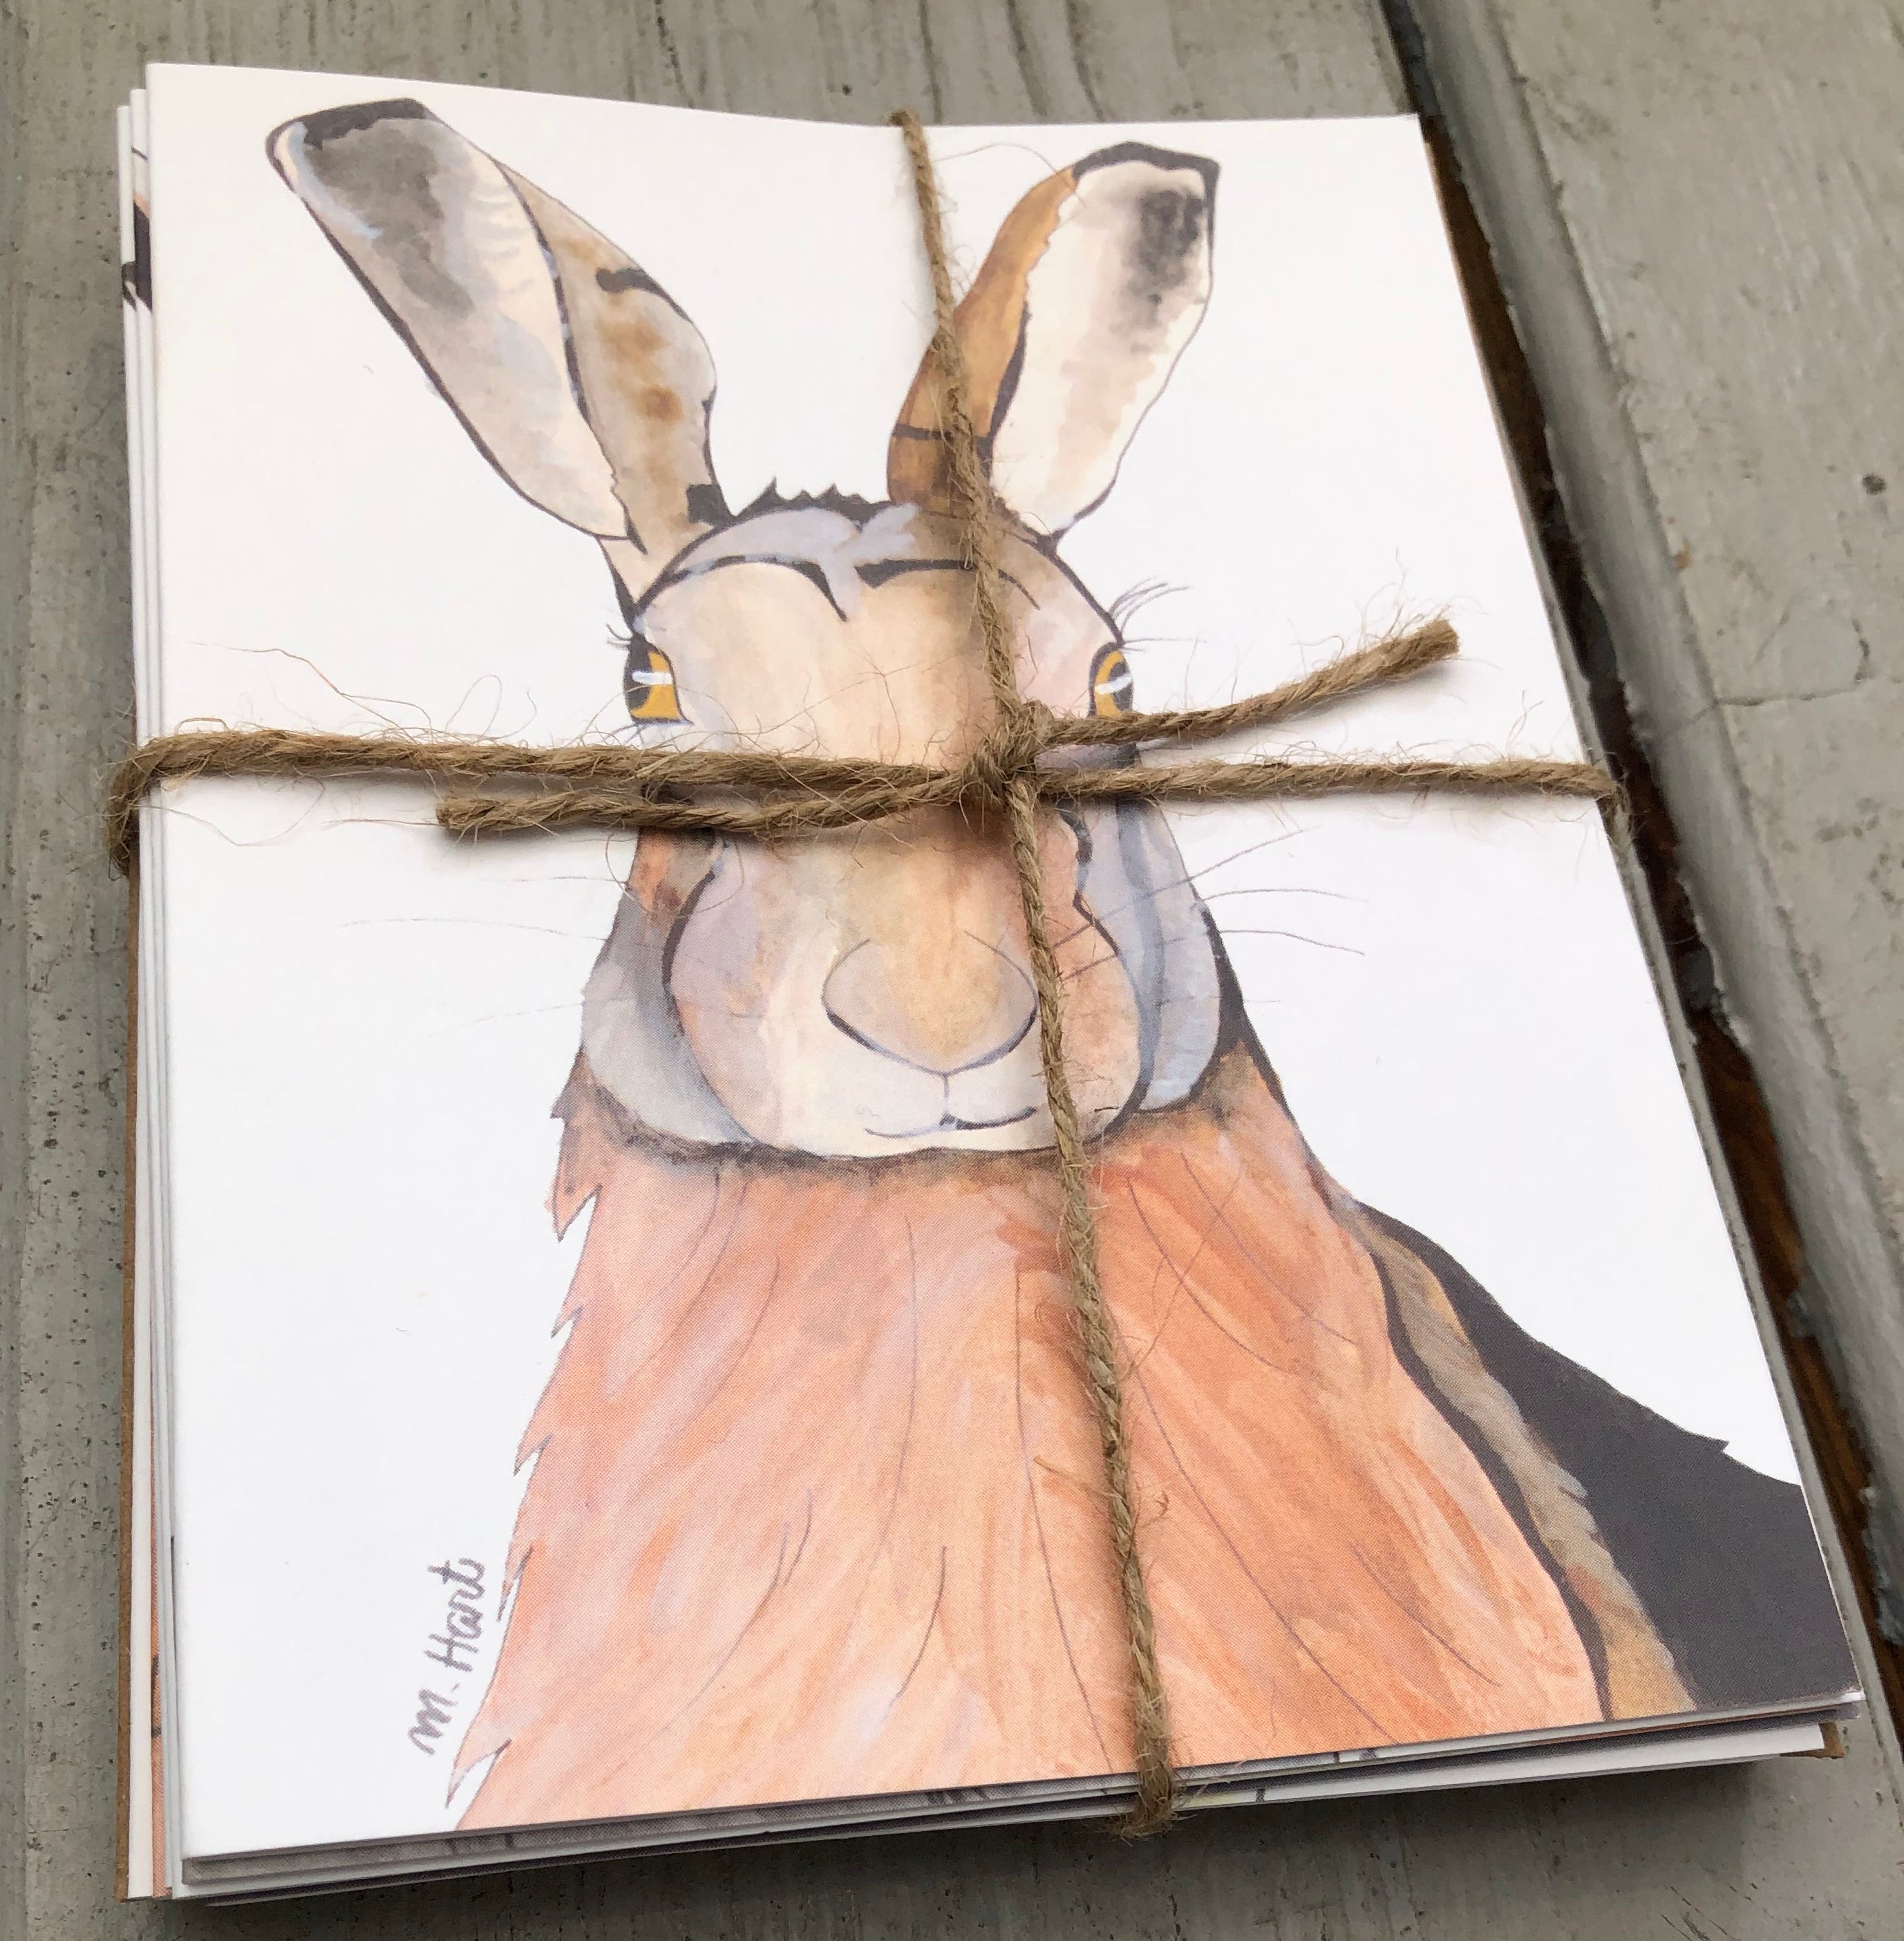 There is a set of 8 notecards stacked on top of each other and bundled together with 8 brown envelopes. The top notecard has a hare design on it. The whole bundle is tied together with twine.